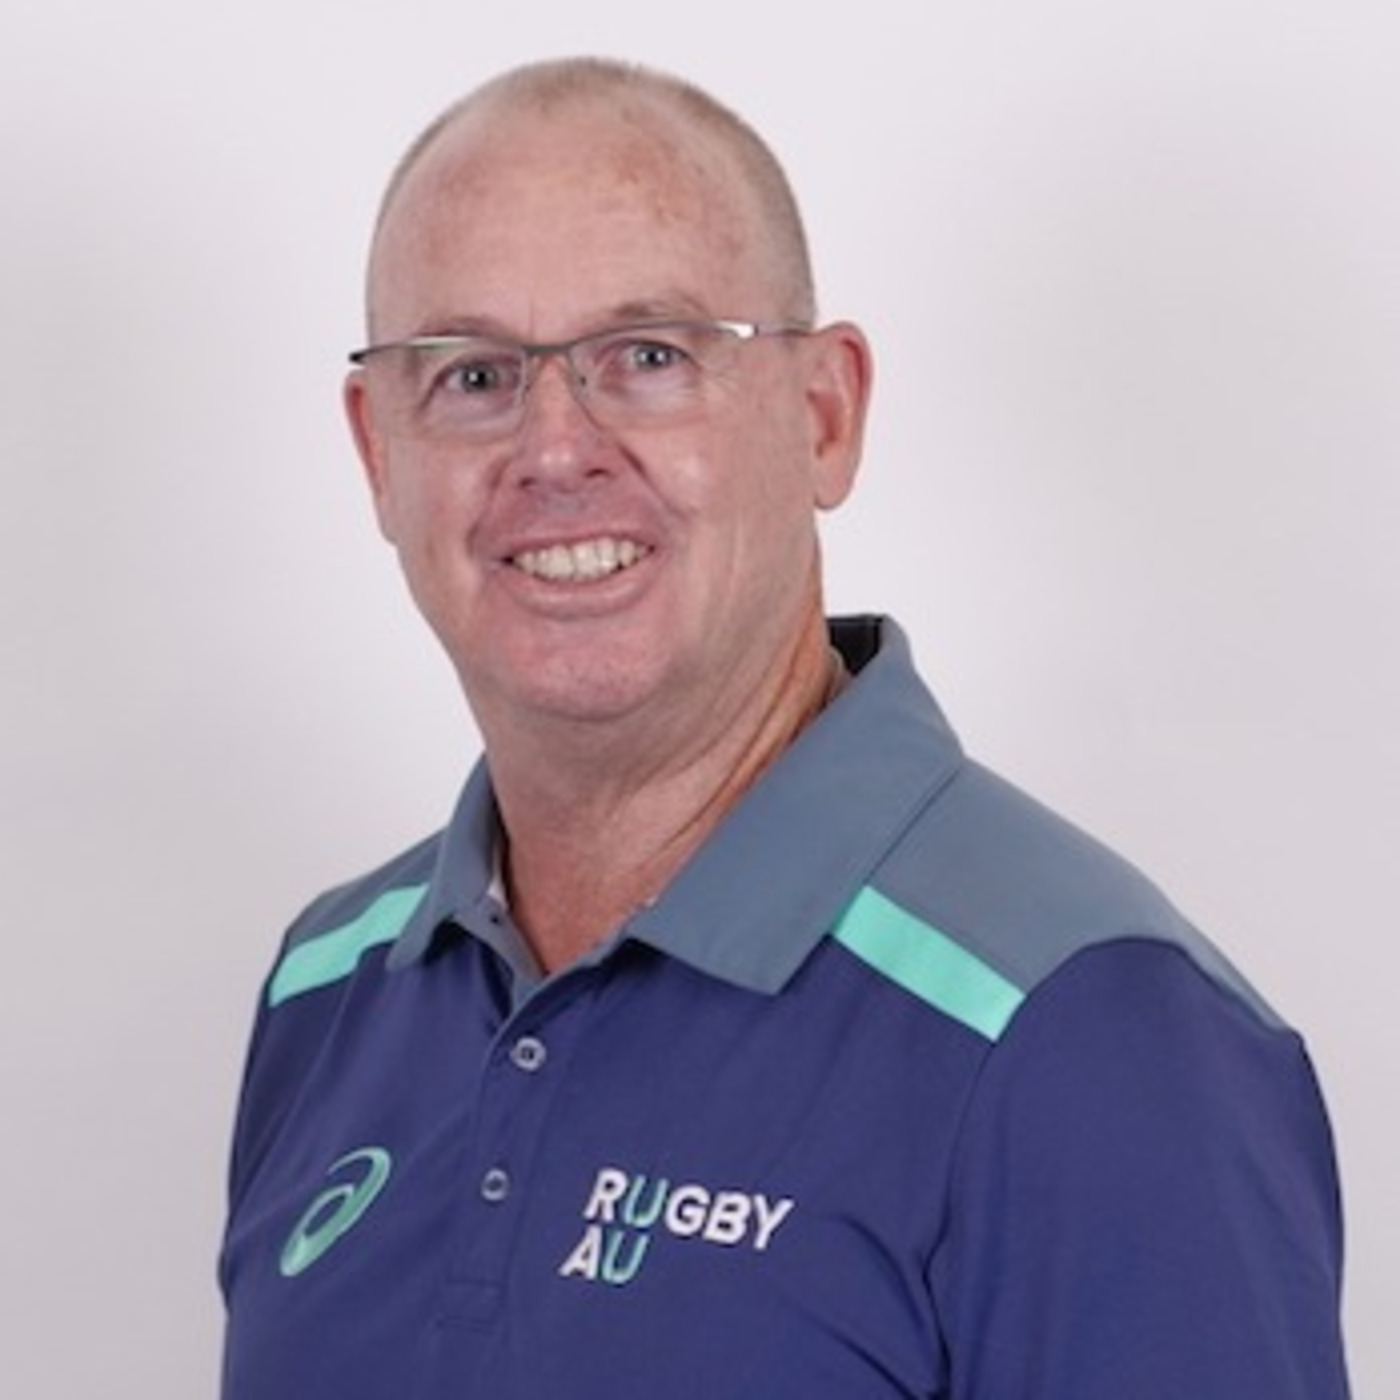 Steve Anderson, Ep 89, DoR at Rugby WA and Author of “A Coach’s Journey”